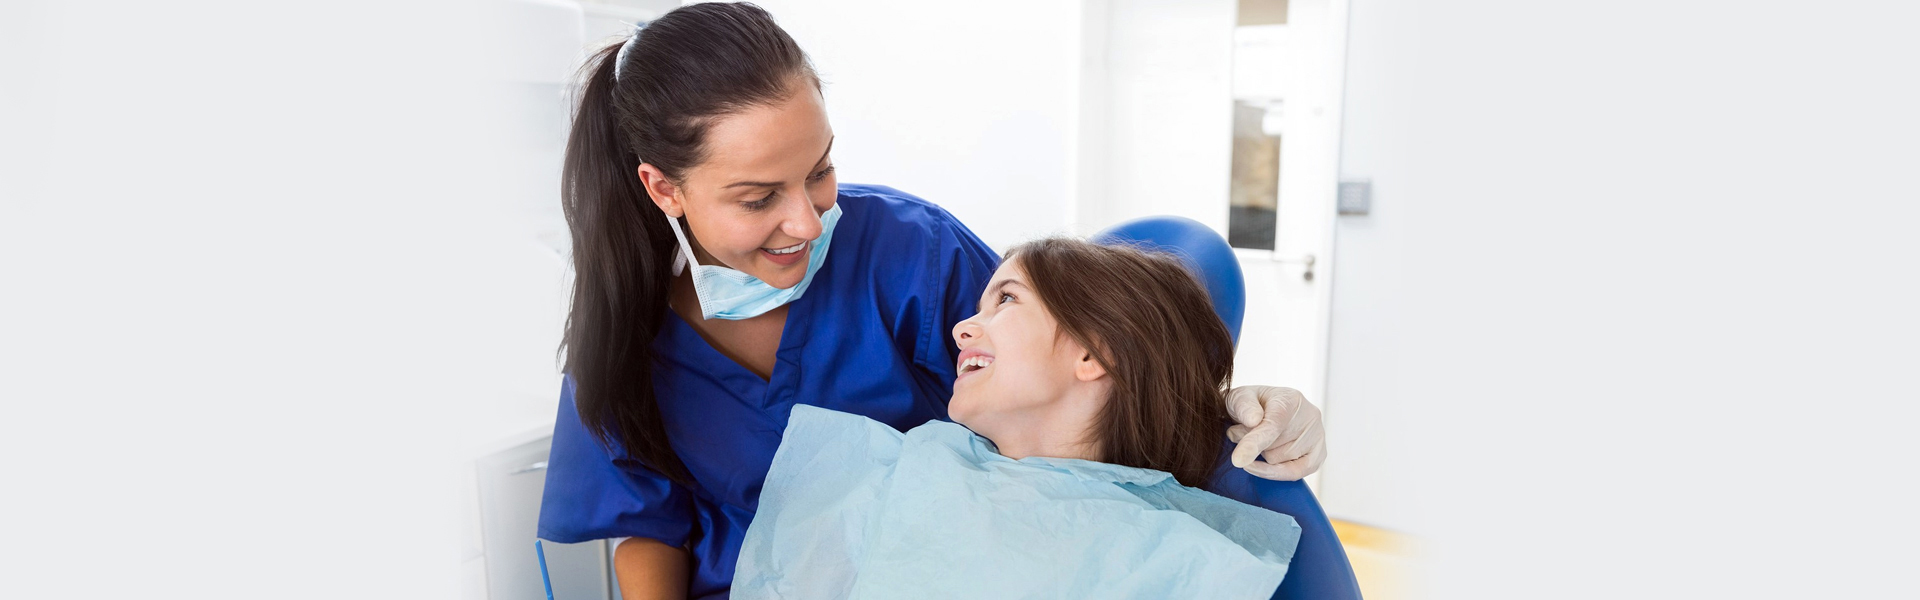 Why Pediatric Dentists Are Preferable for Your Child’s Dental Health